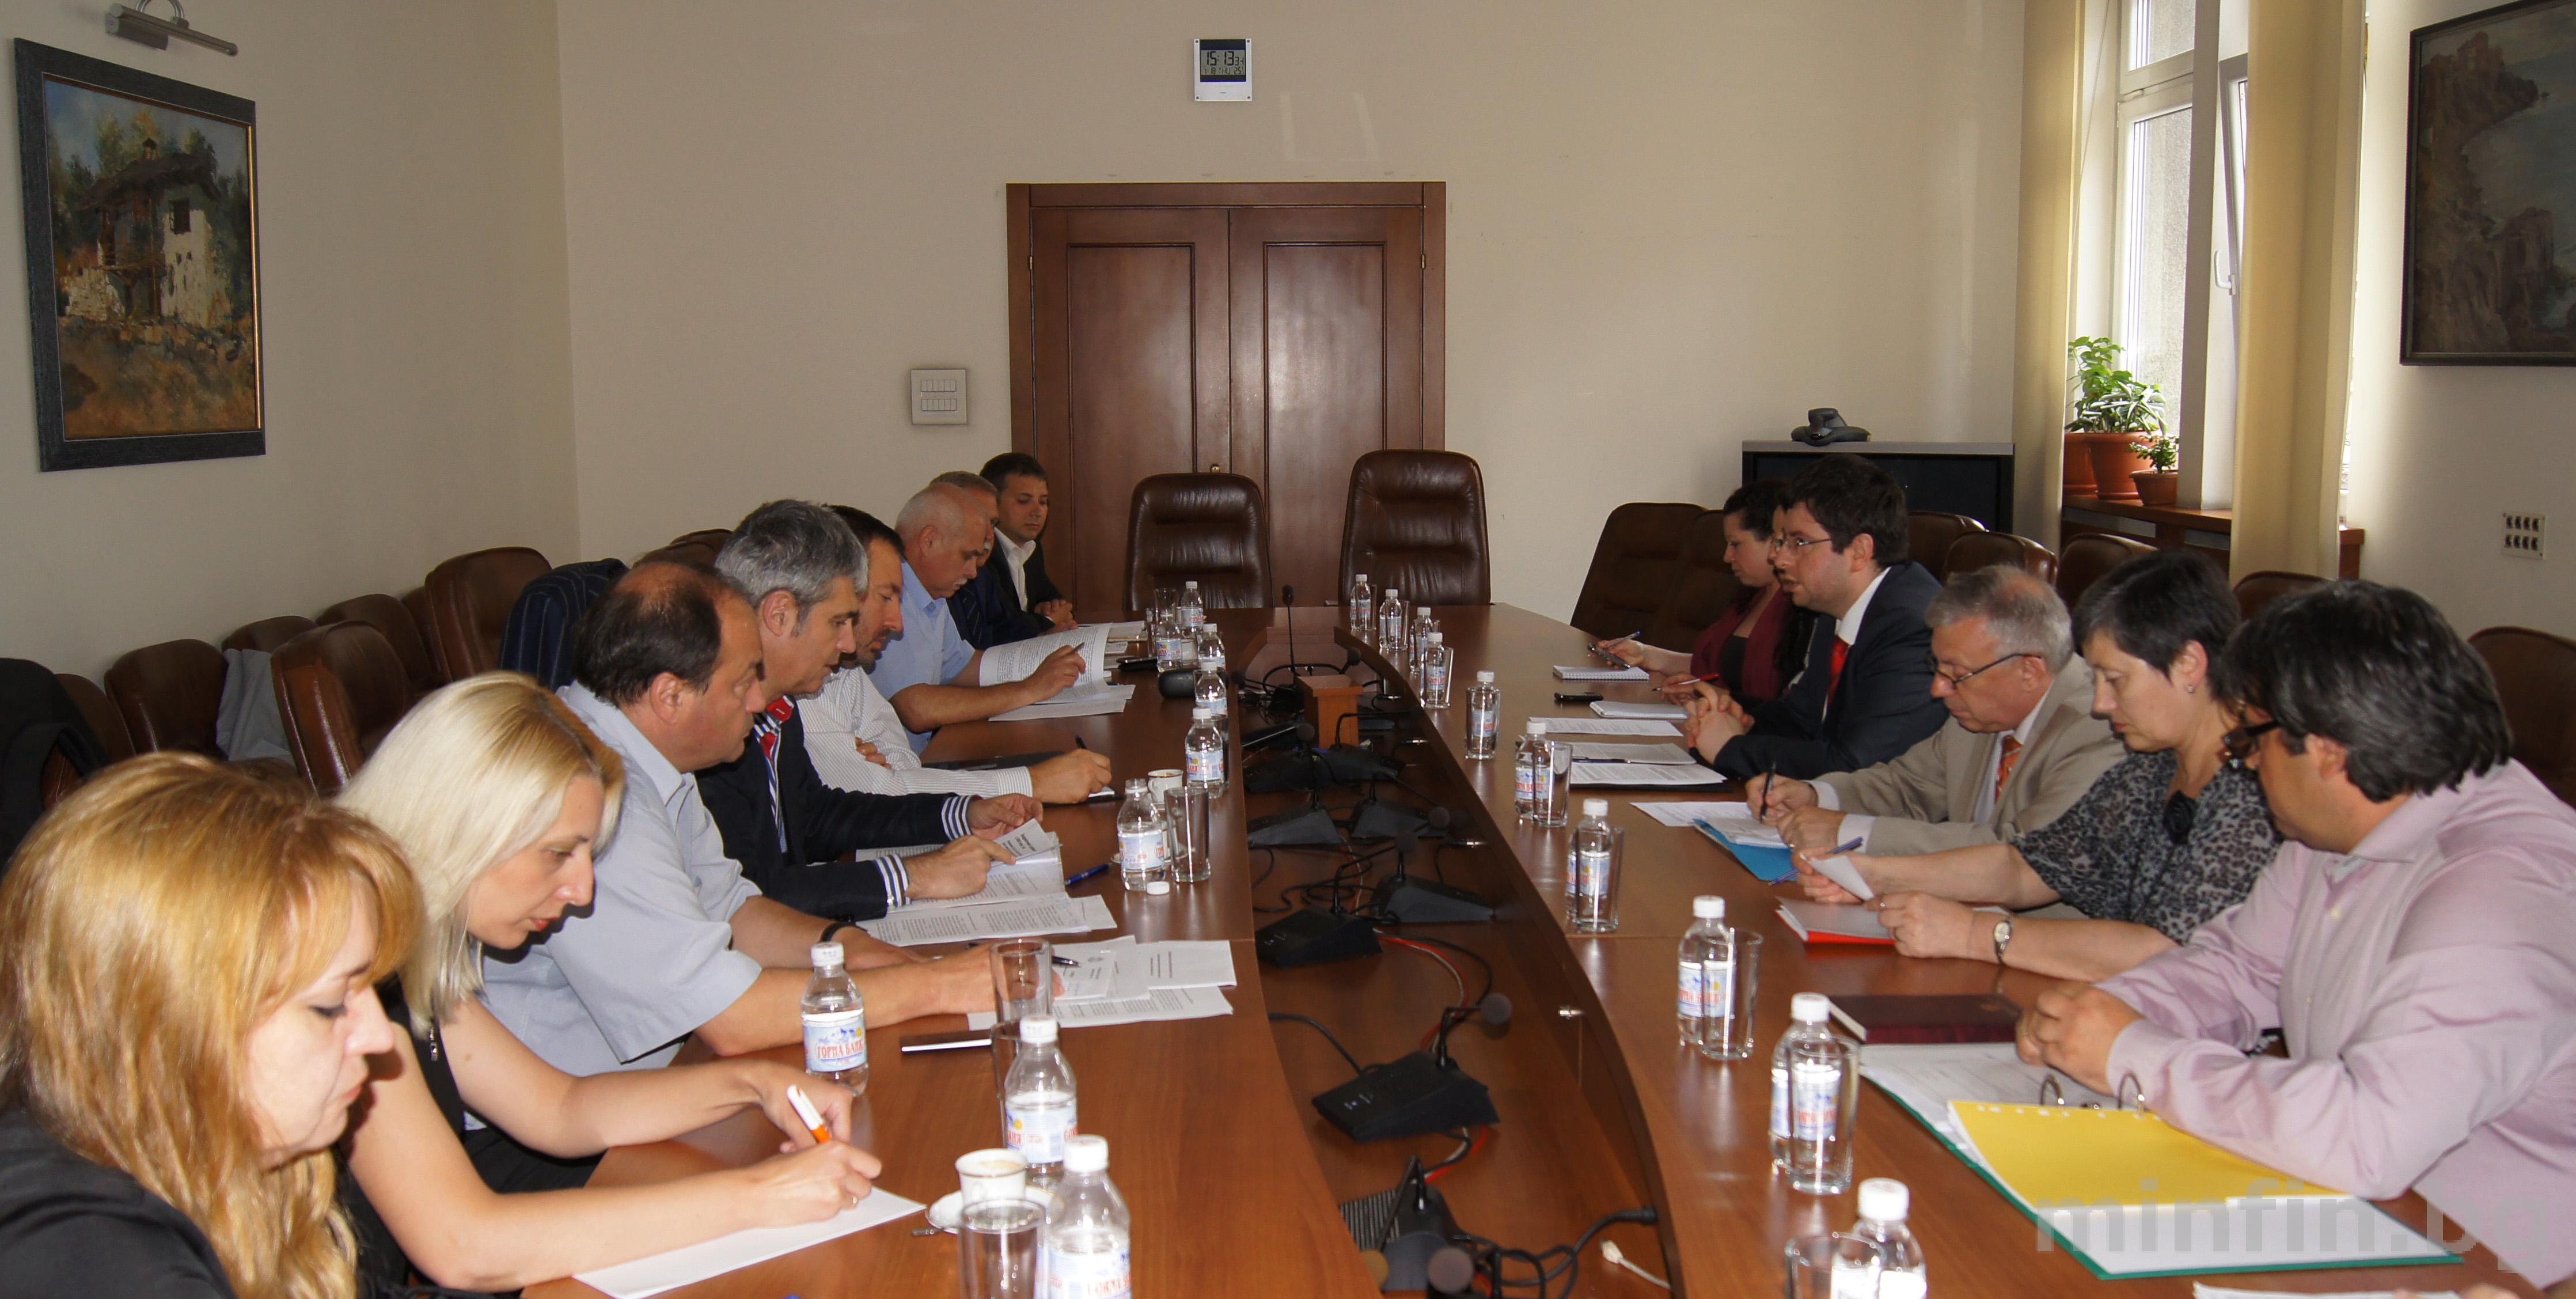 THE MINISTER OF FINANCE DISCUSSED THE 2013 BUDGET REVISION WITH SOCIAL AND ECONOMIC PARTNERS